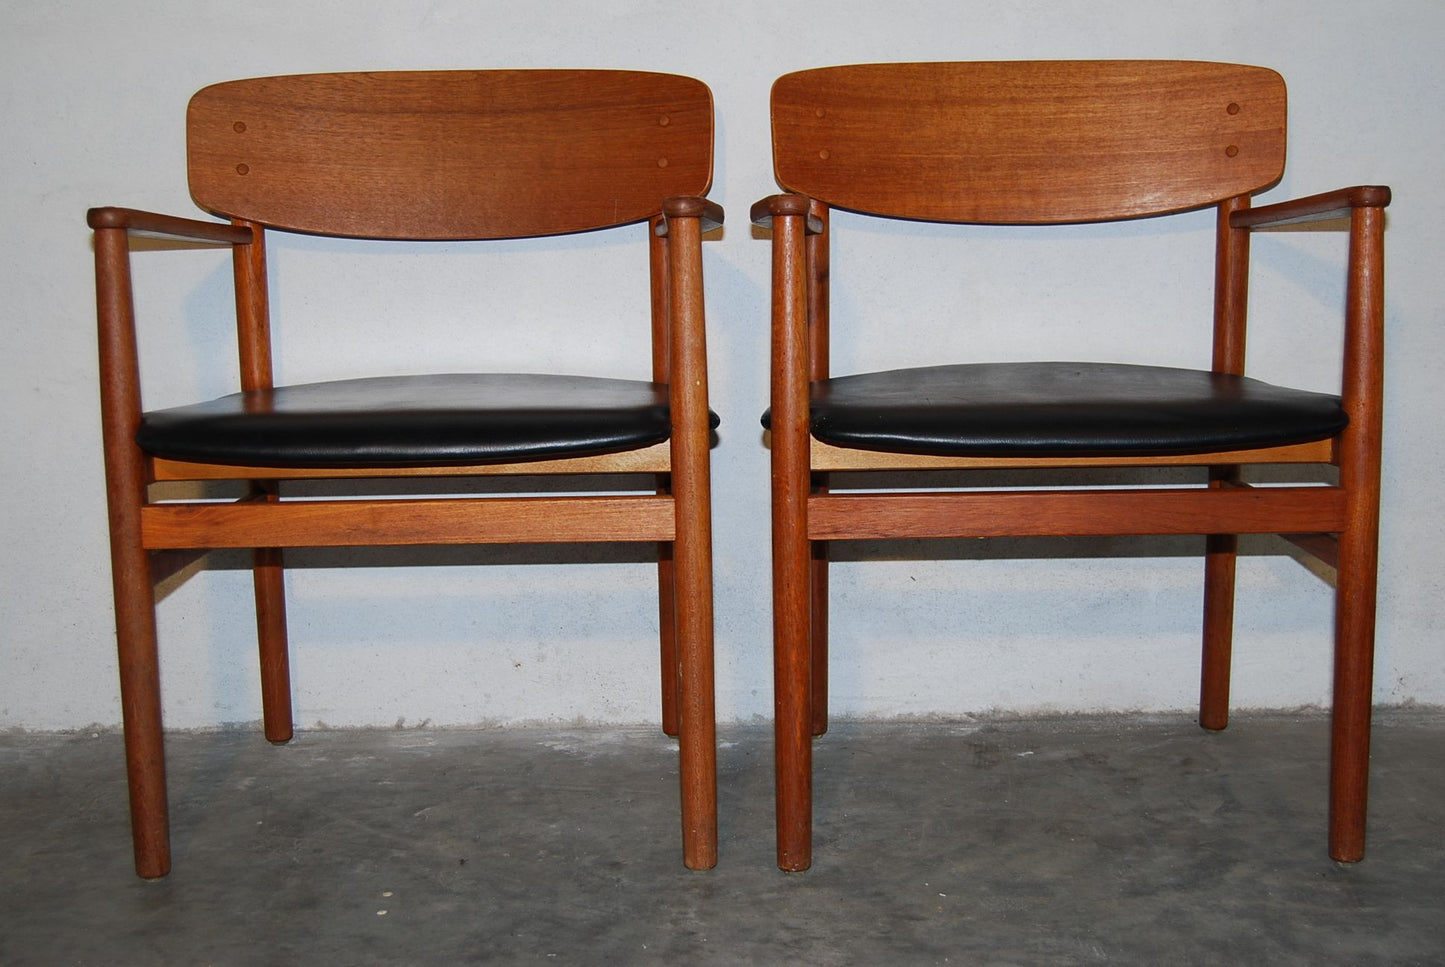 Pair of Armchairs by Kvetny & Sonner